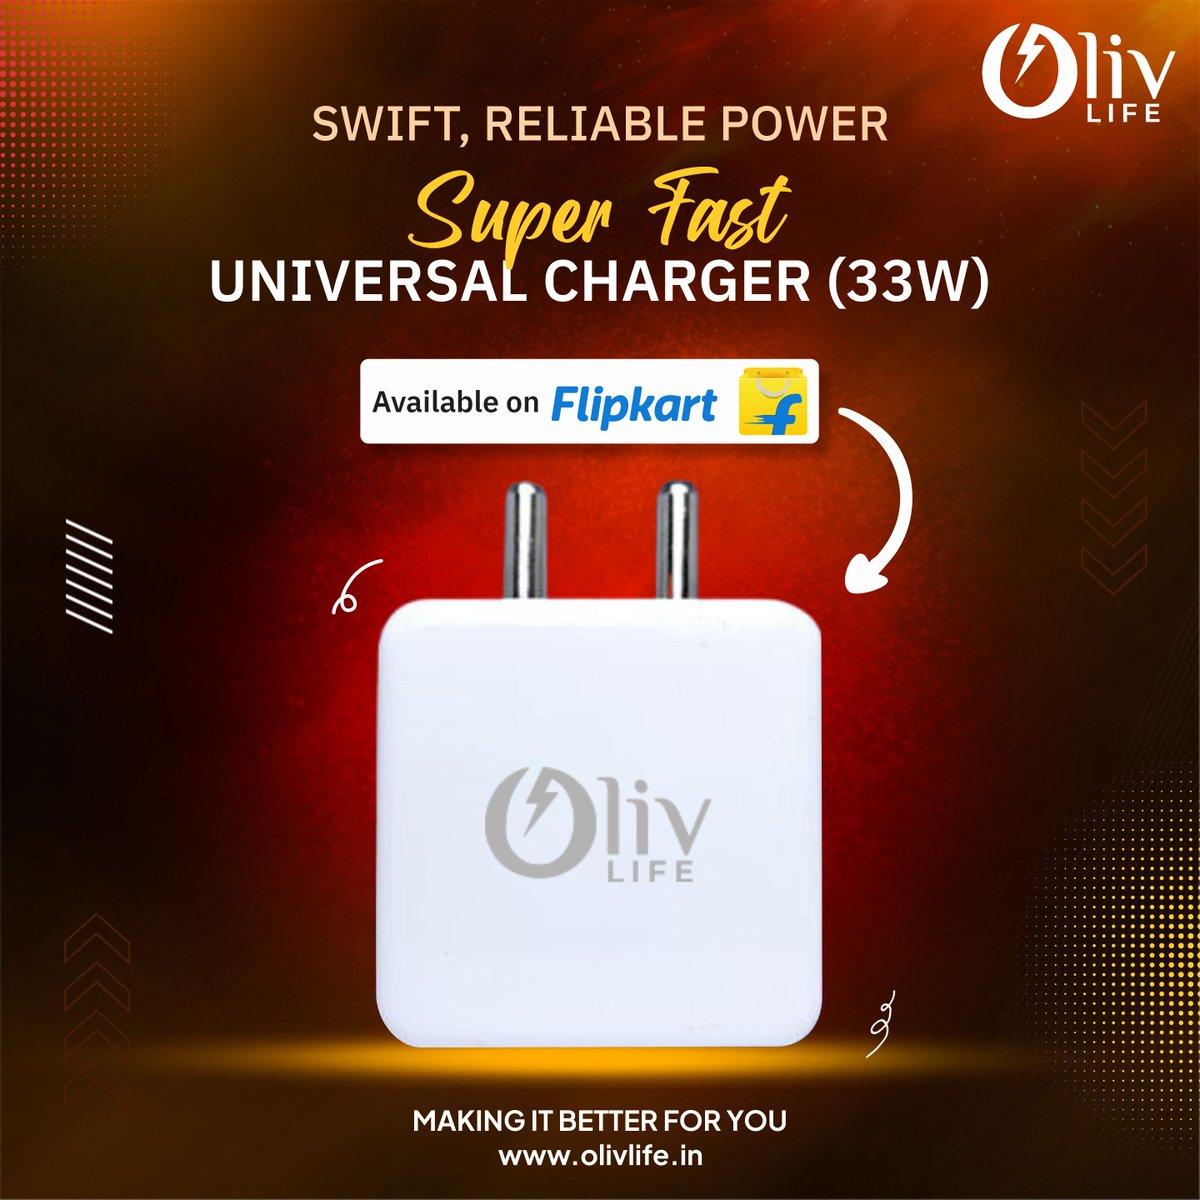 Experience Ultra-Fast Charging with Our 33W Super Fast Universal Charger!

Available on Flipkart - bit.ly/3uE9ARB

#FastCharging #UniversalCharger #madeinindia #earphone #neckbandearphones #wirelessearbuds #onlineshopping #technology #tech #olivlife  #charger